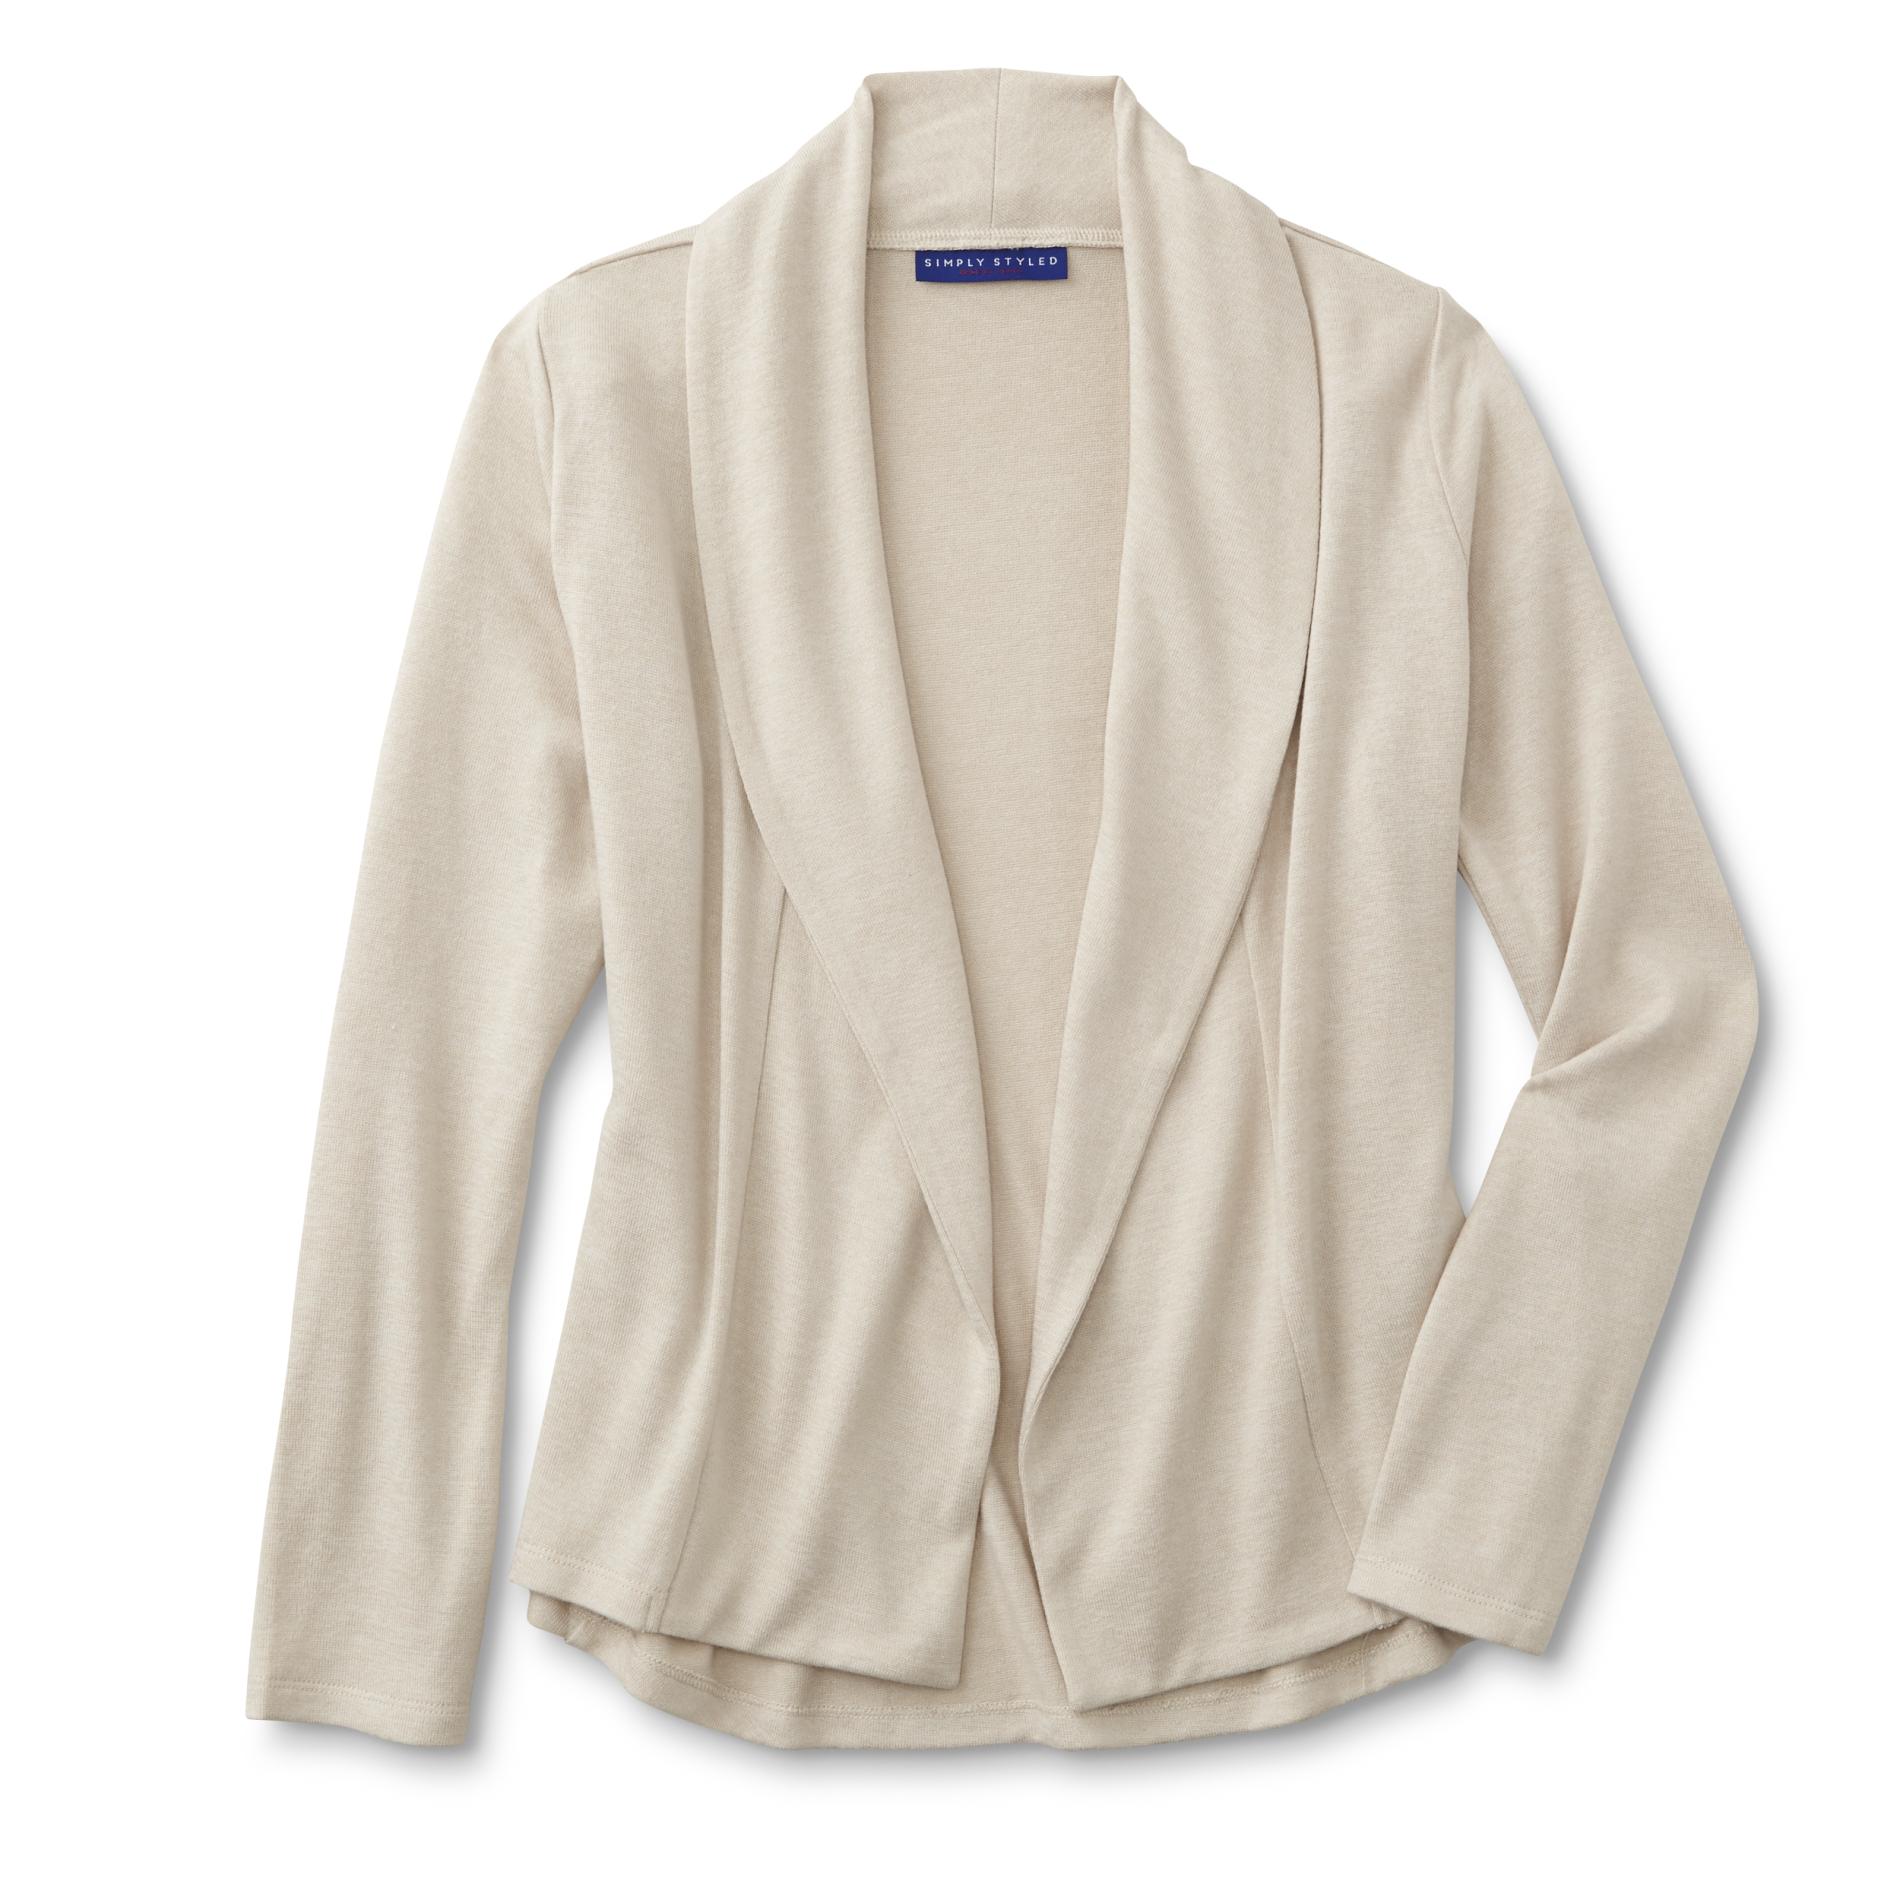 Simply Styled Girls' Open-Front Cardigan